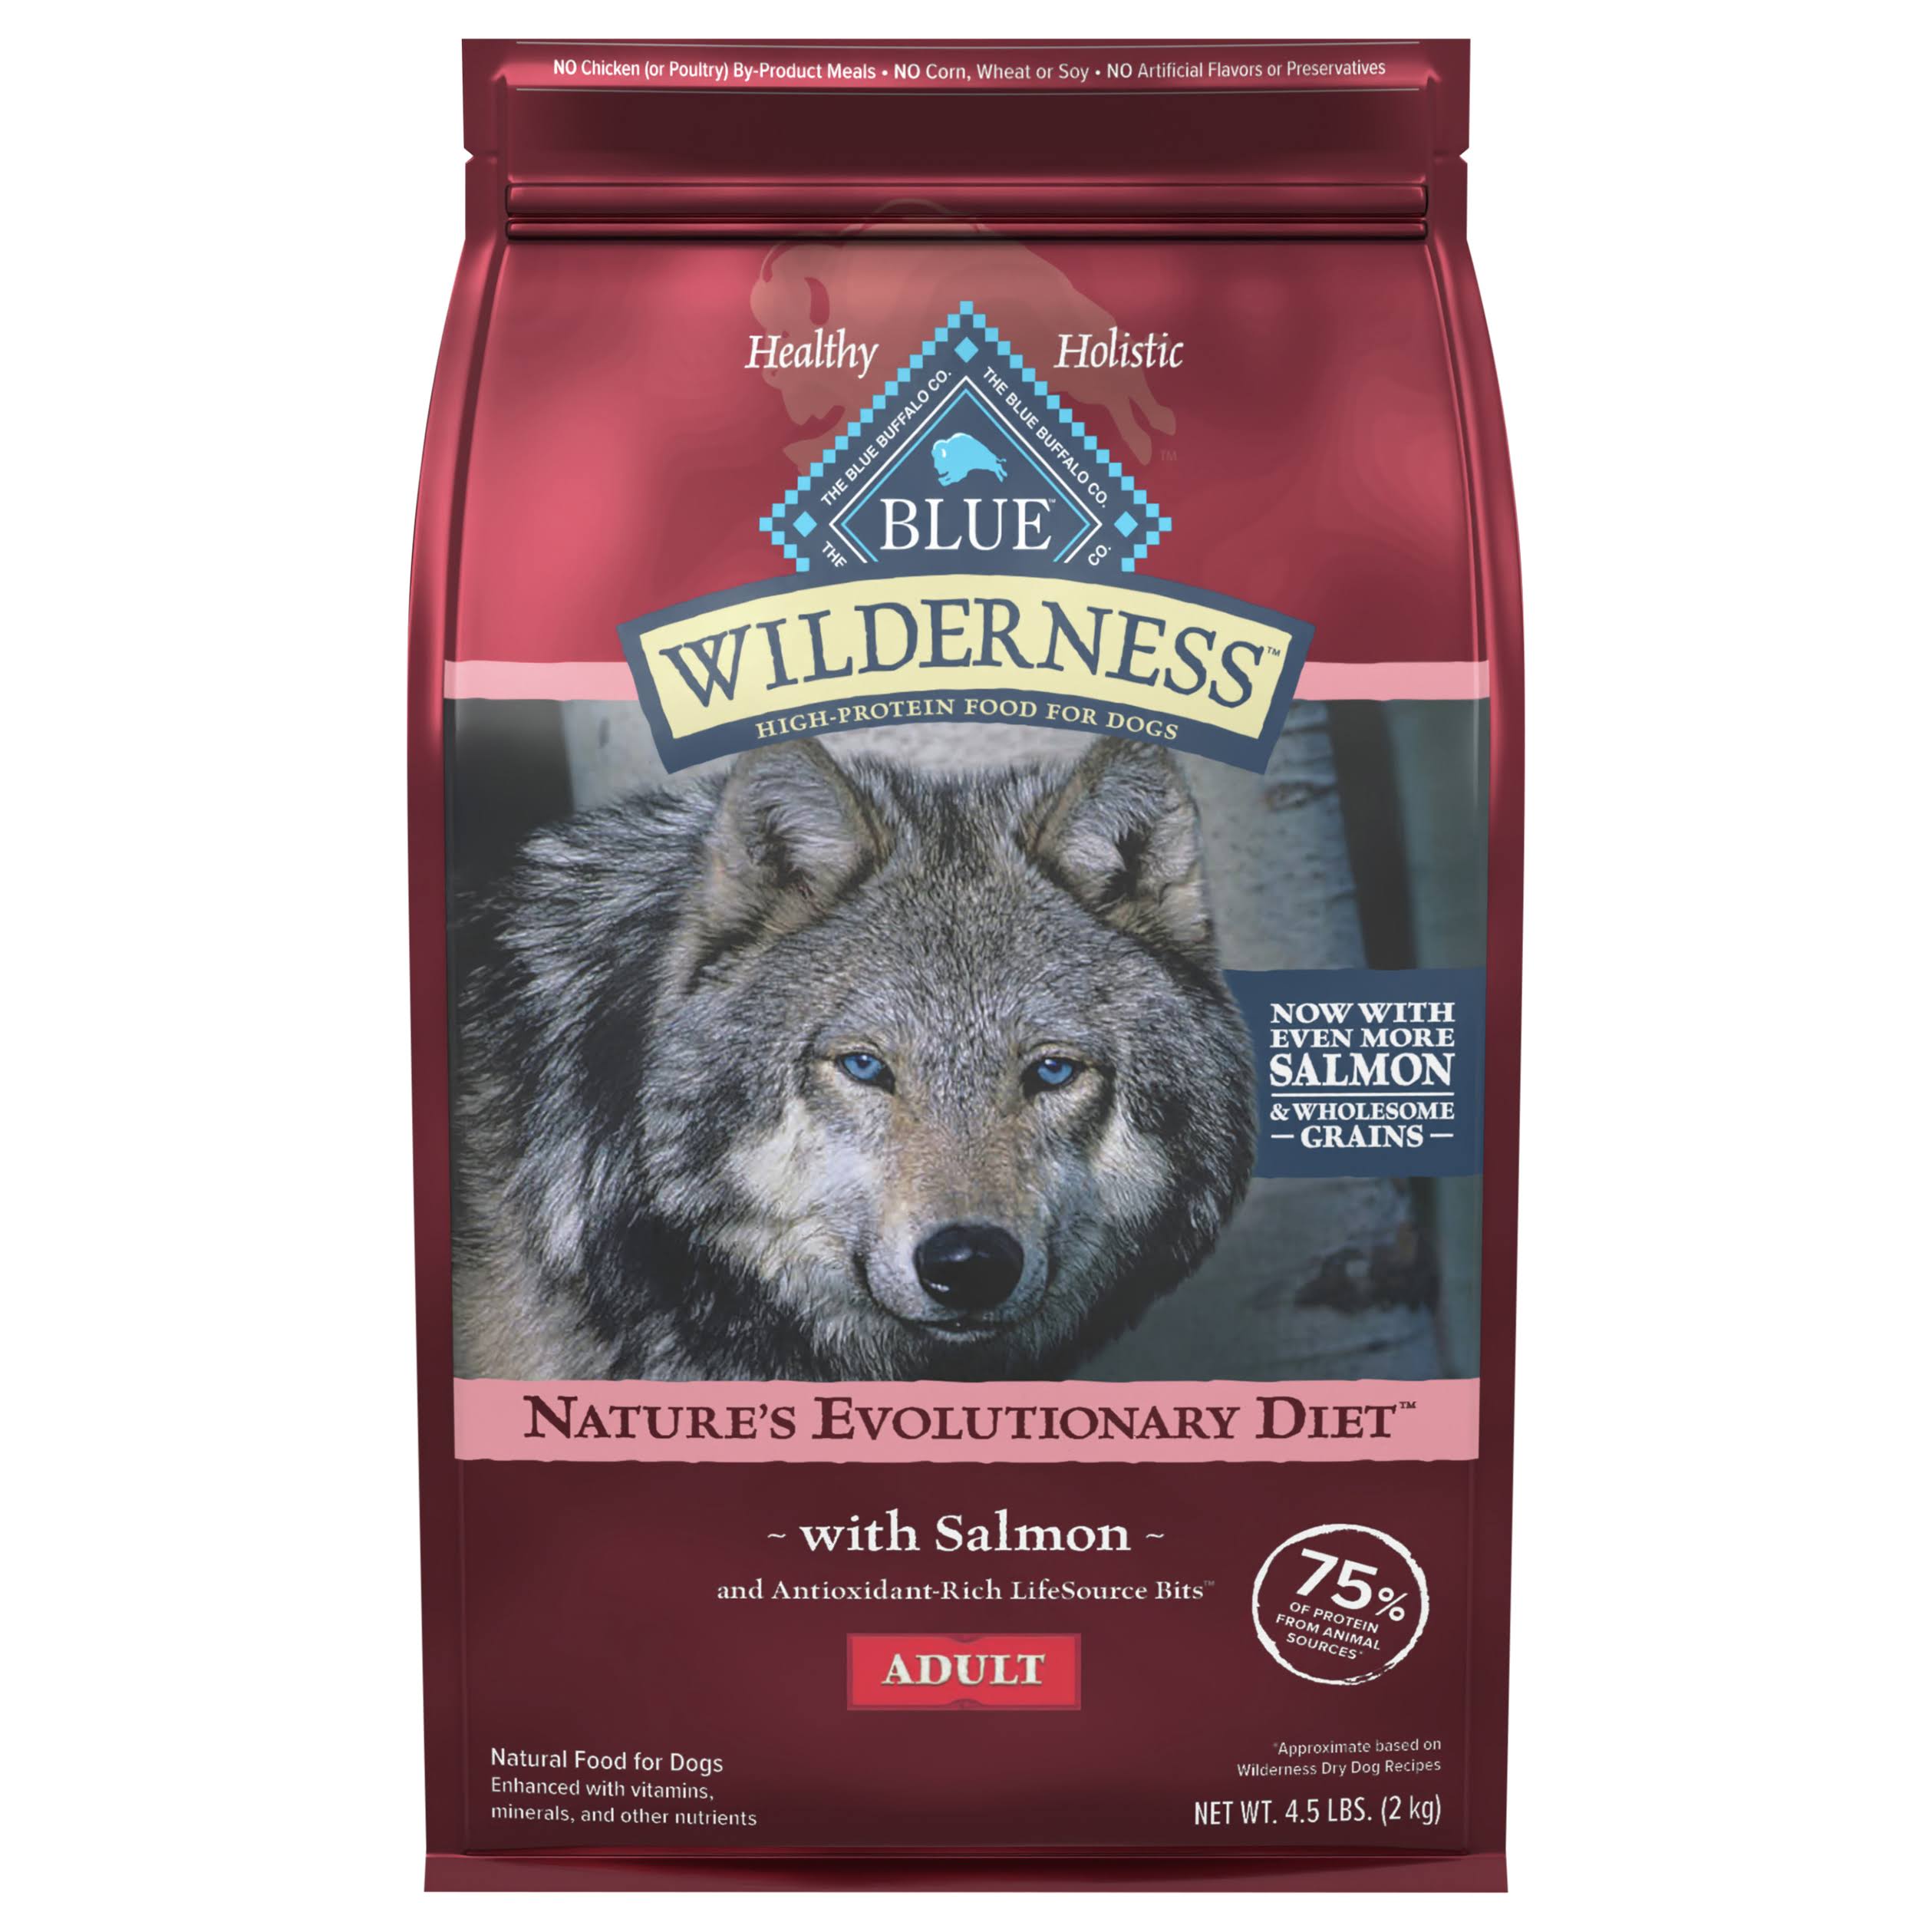 Blue Buffalo Wilderness Nature's Evolutionary Diet With Salmon & Wholesome Grains Adult Recipe Dry Dog Food